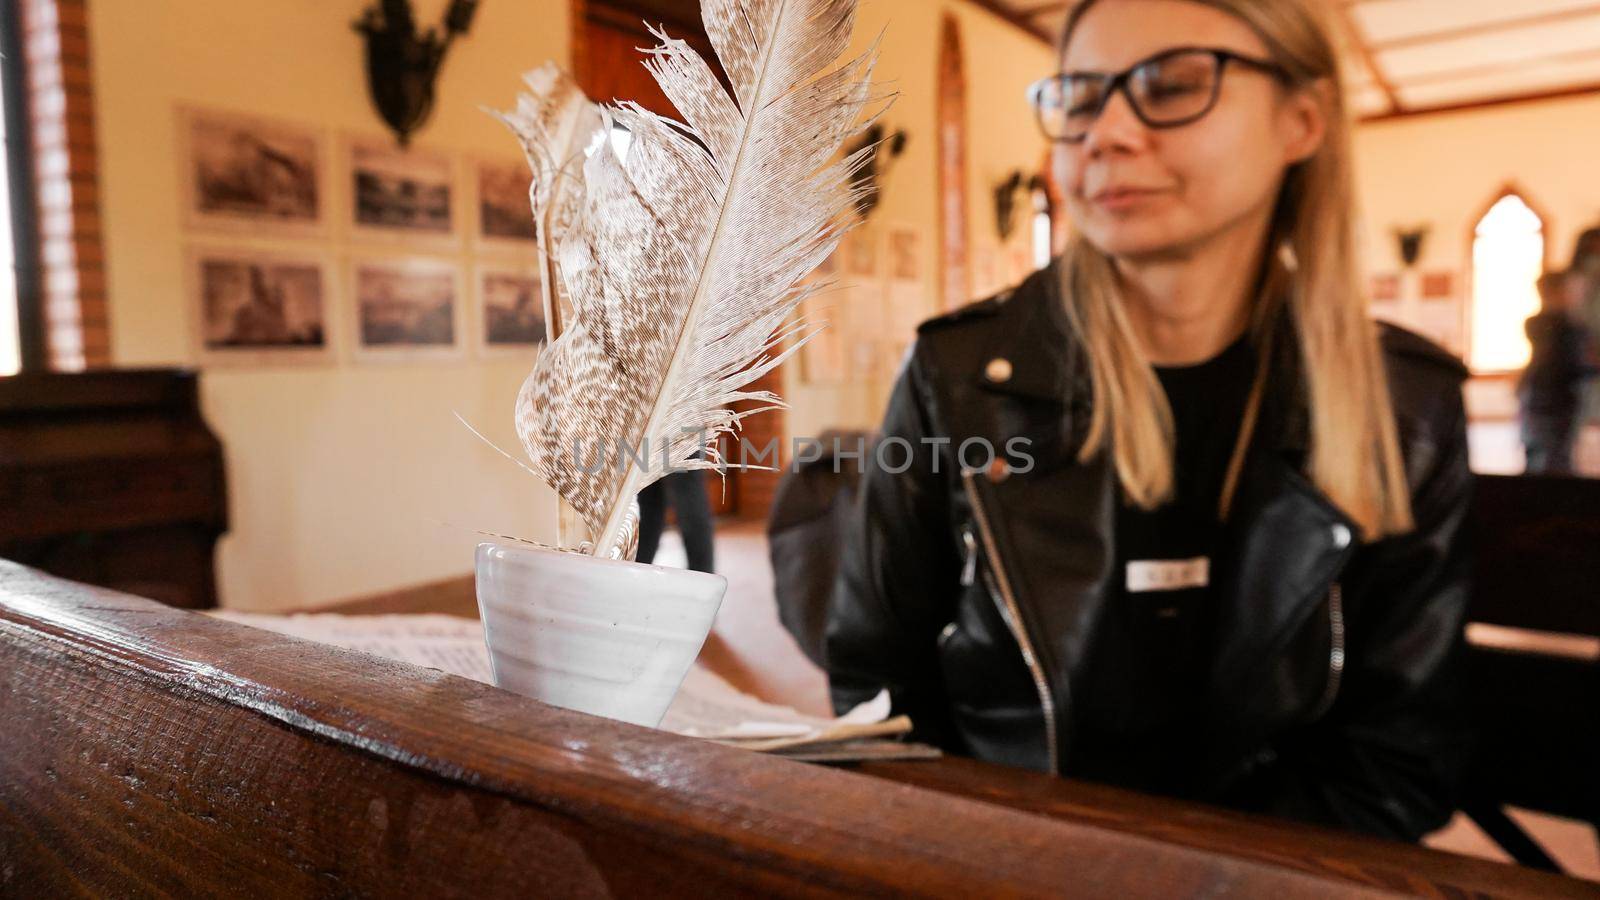 White quill and inkwell in the old university auditorium. Female student with glasses on a blurred background. Medieval atmosphere